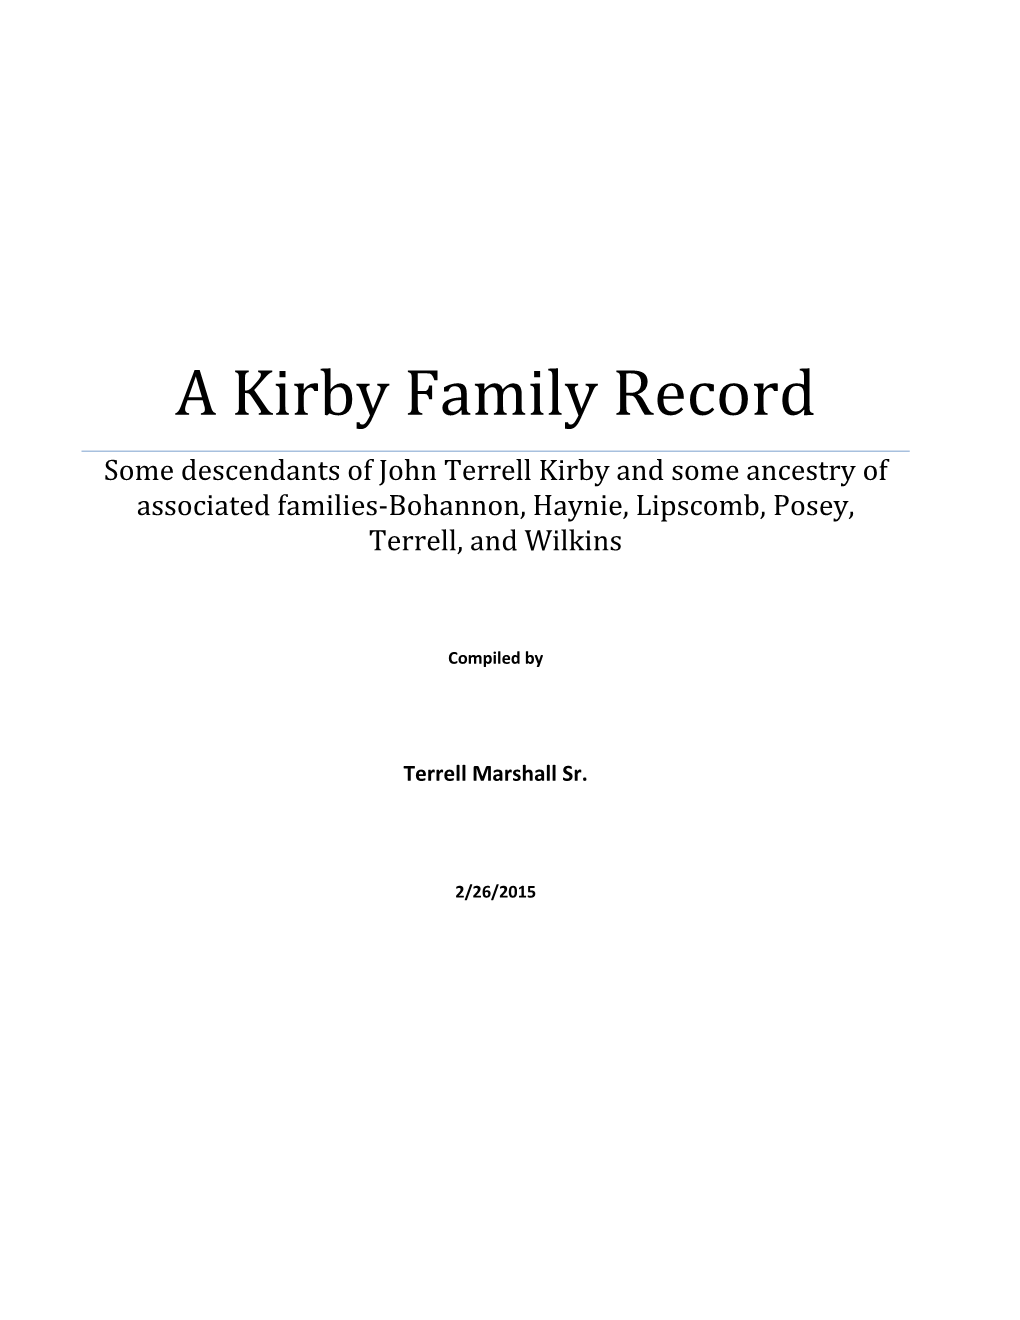 A Kirby Family Record Some Descendants of John Terrell Kirby and Some Ancestry of Associated Families-Bohannon, Haynie, Lipscomb, Posey, Terrell, and Wilkins